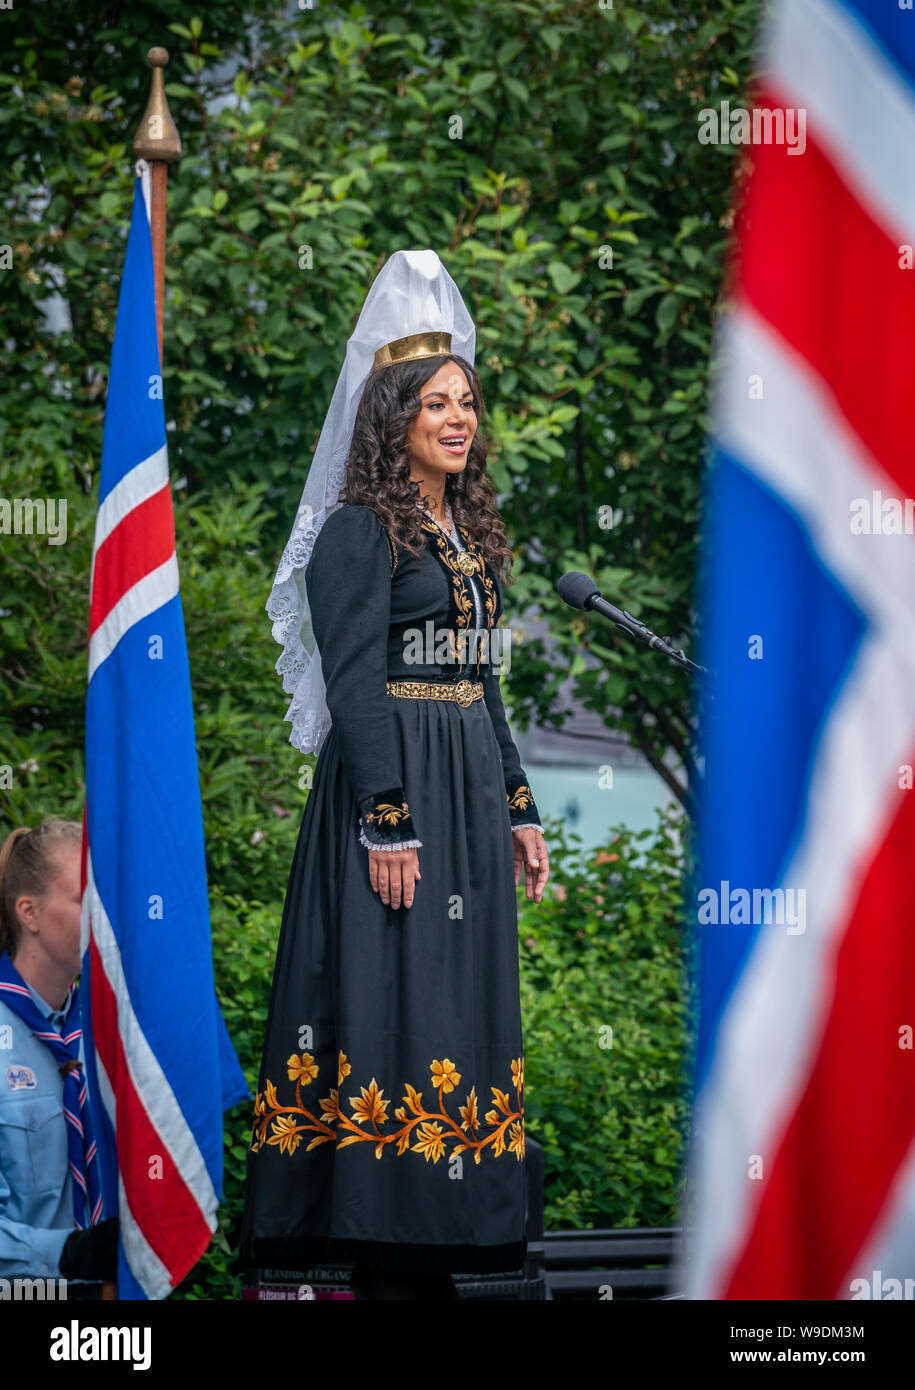 Fjallkonan- "Lady of the Mountain" dressed in Iceland's national costume, Independence day, June 17th, Reykjavik, Iceland. Stock Photo